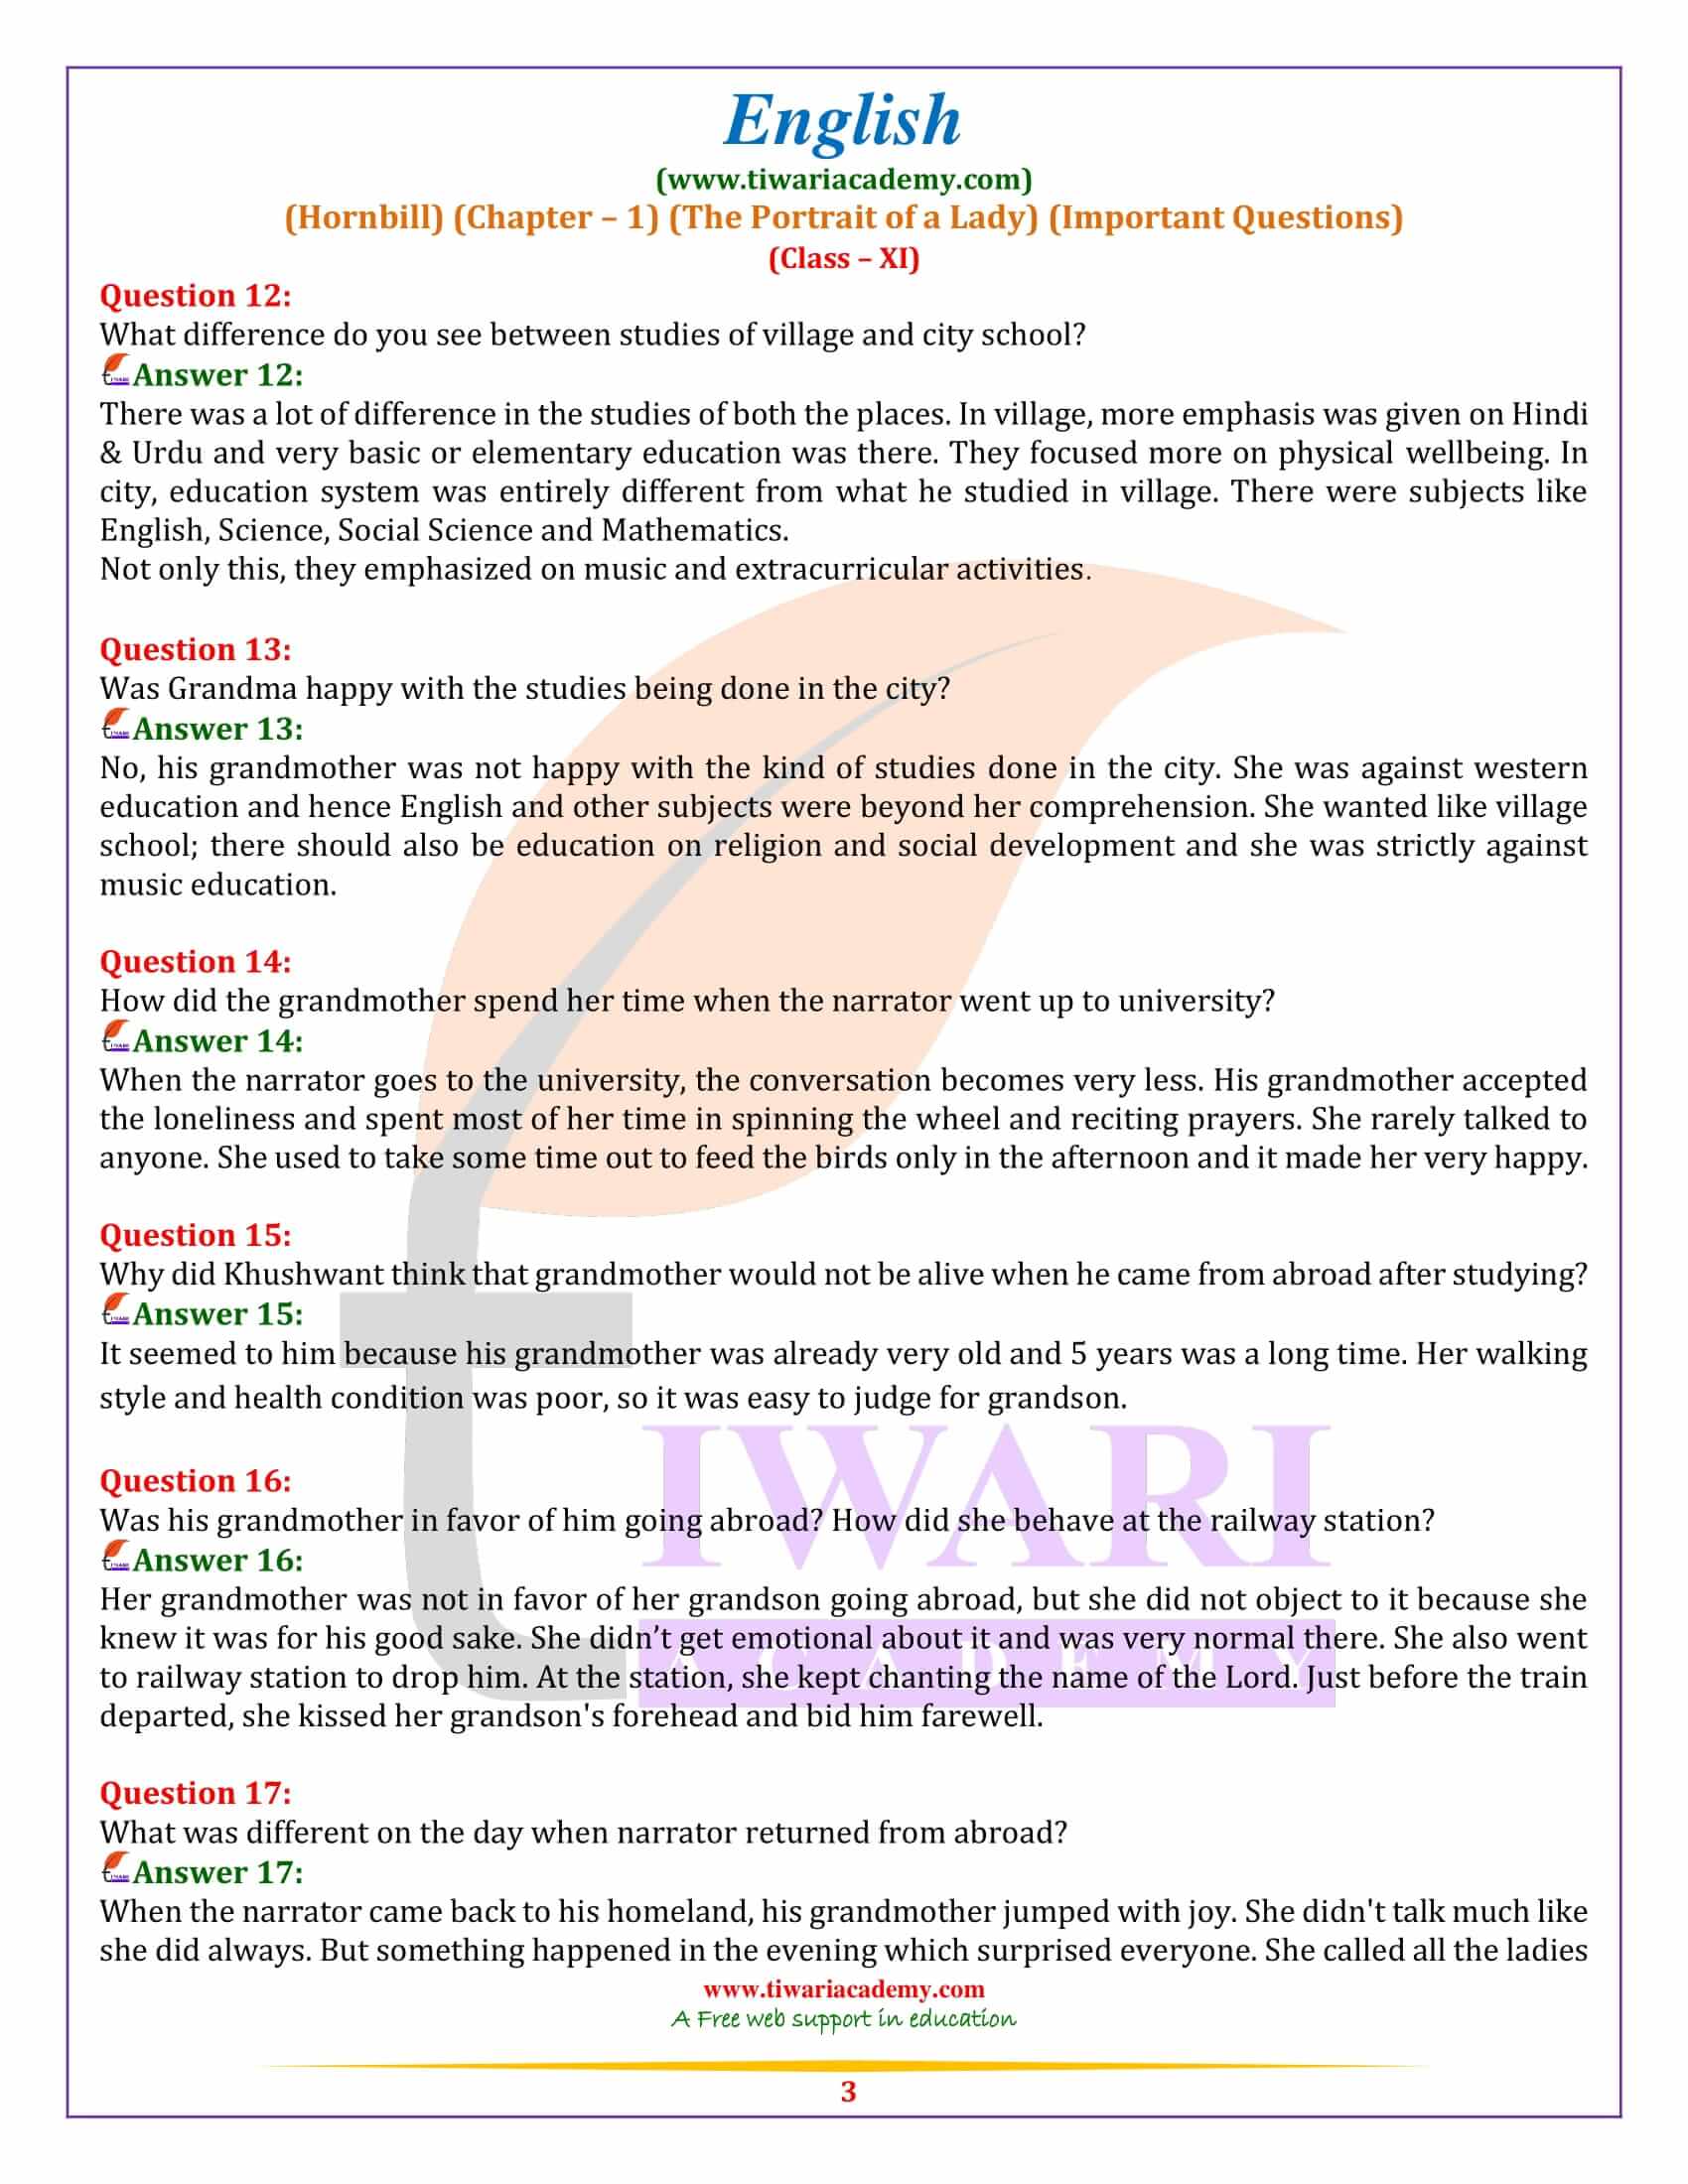 Class 11 English Hornbill Chapter 1 Important Questions Answers